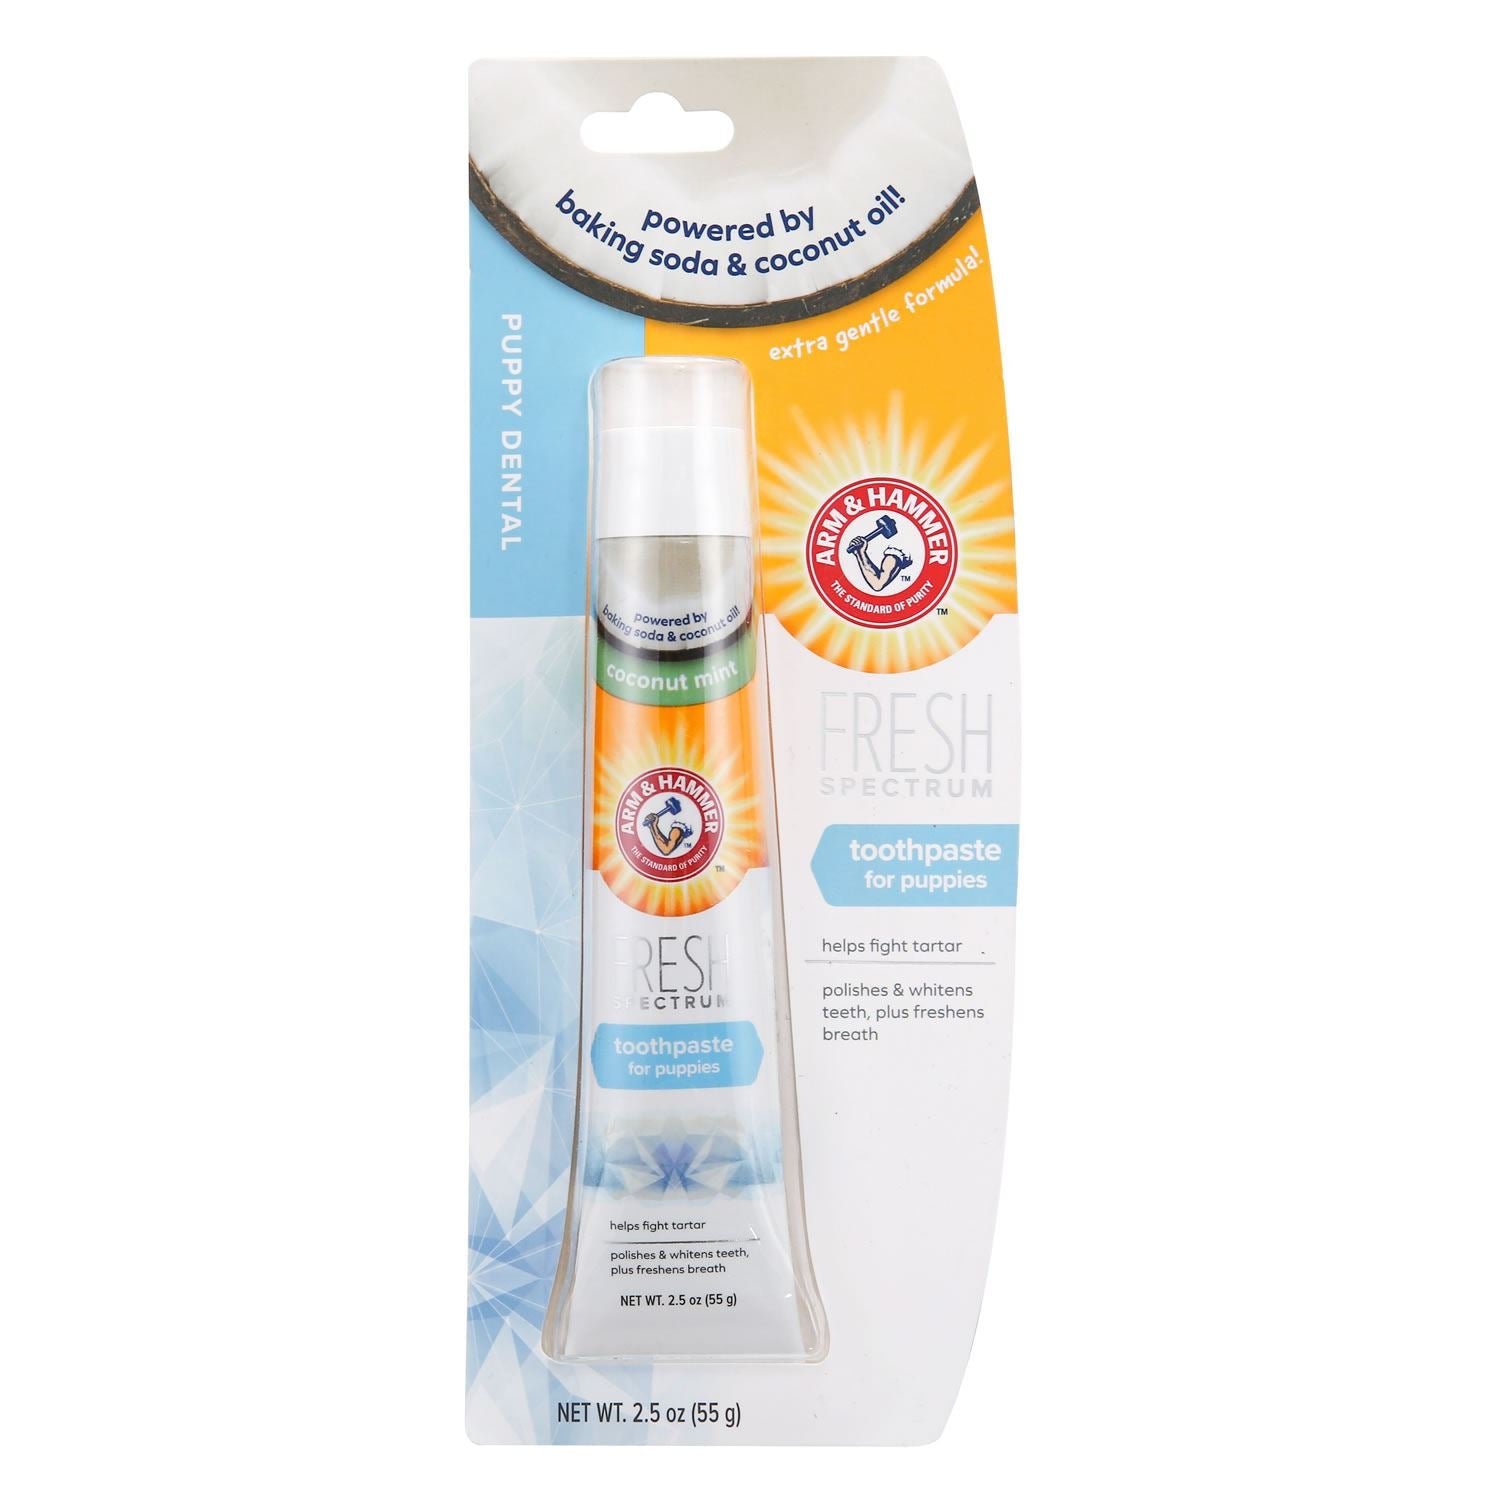 Arm & Hammer Fresh Coconut Mint Toothpaste For Puppies - Just Horse Riders